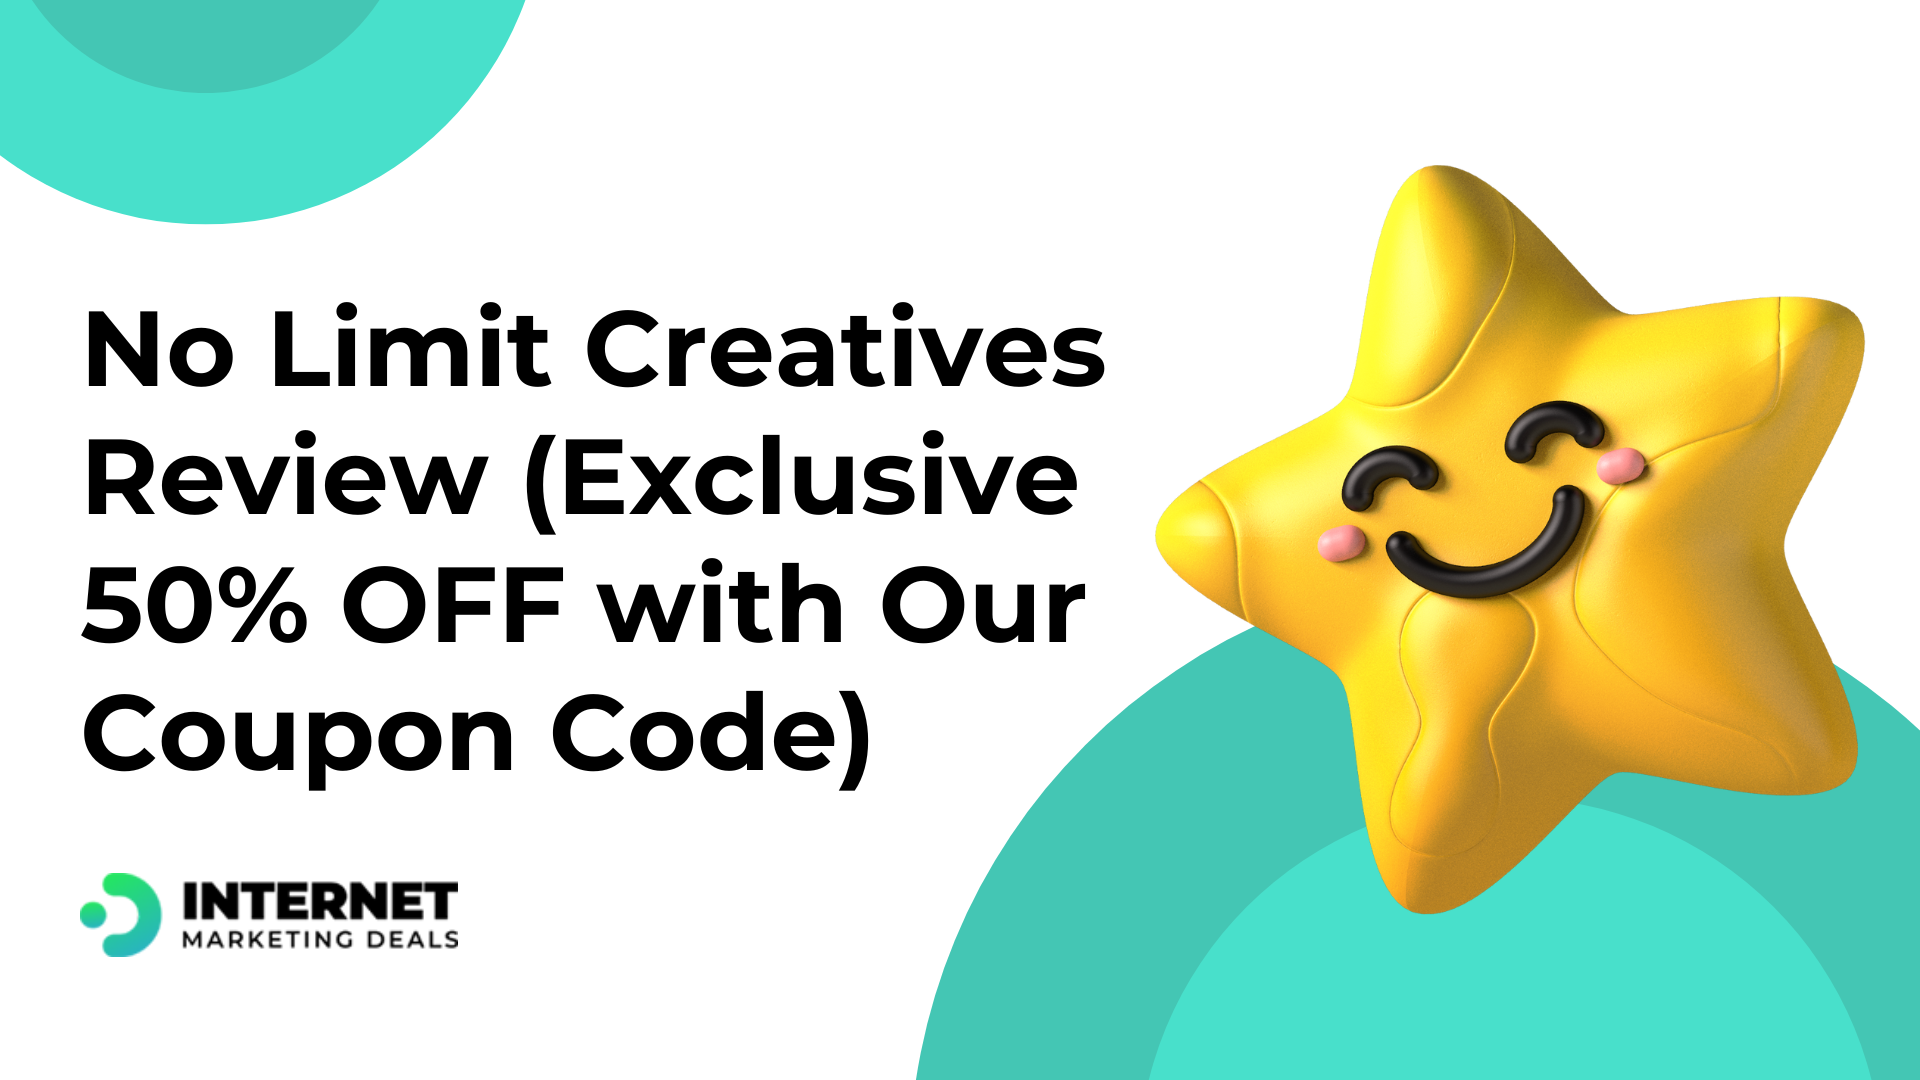 No Limit Creatives Review (Exclusive 50% OFF with Our Coupon Code)